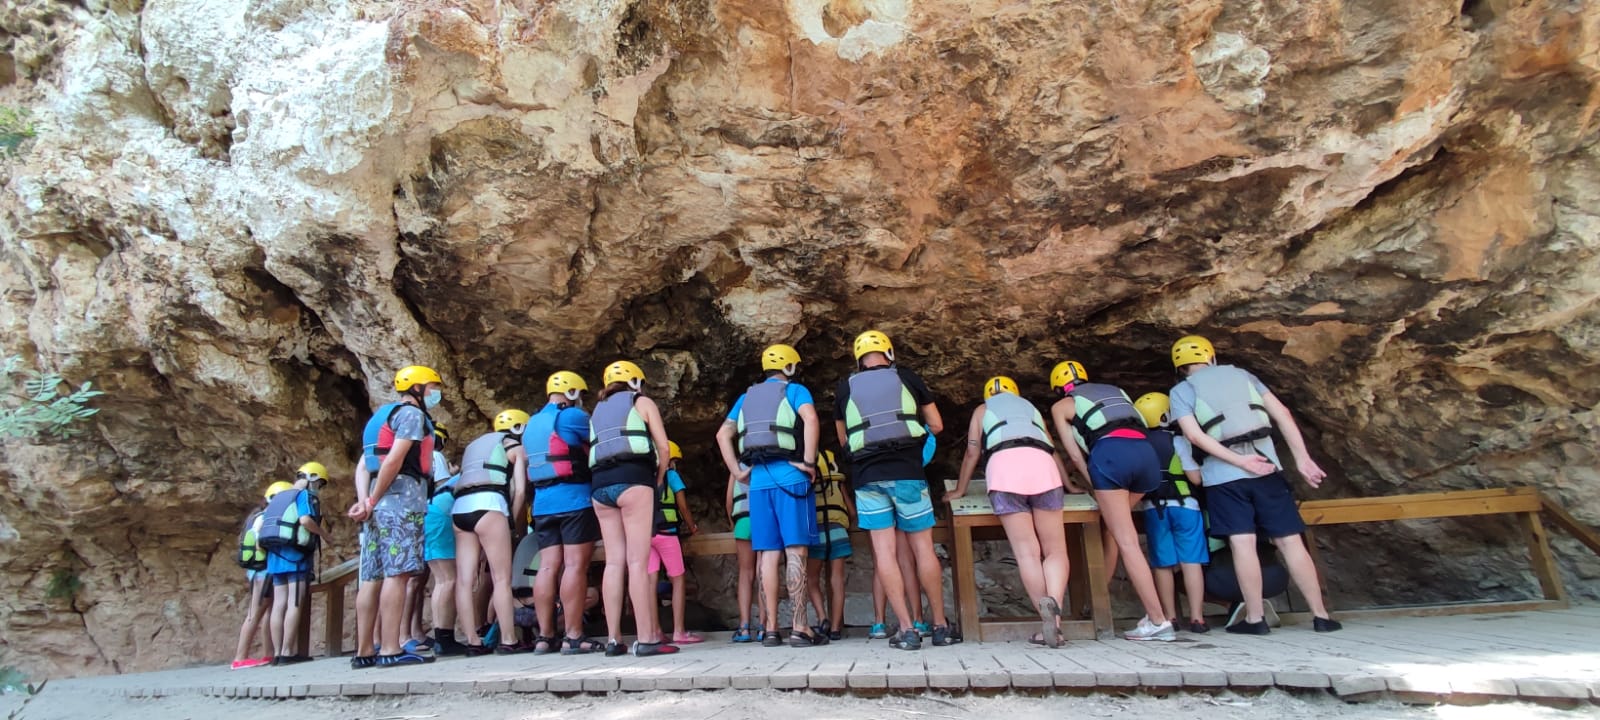 Adventure Getaway Rafting Adventure, Caves, And Relaxation On The Costa Cálida